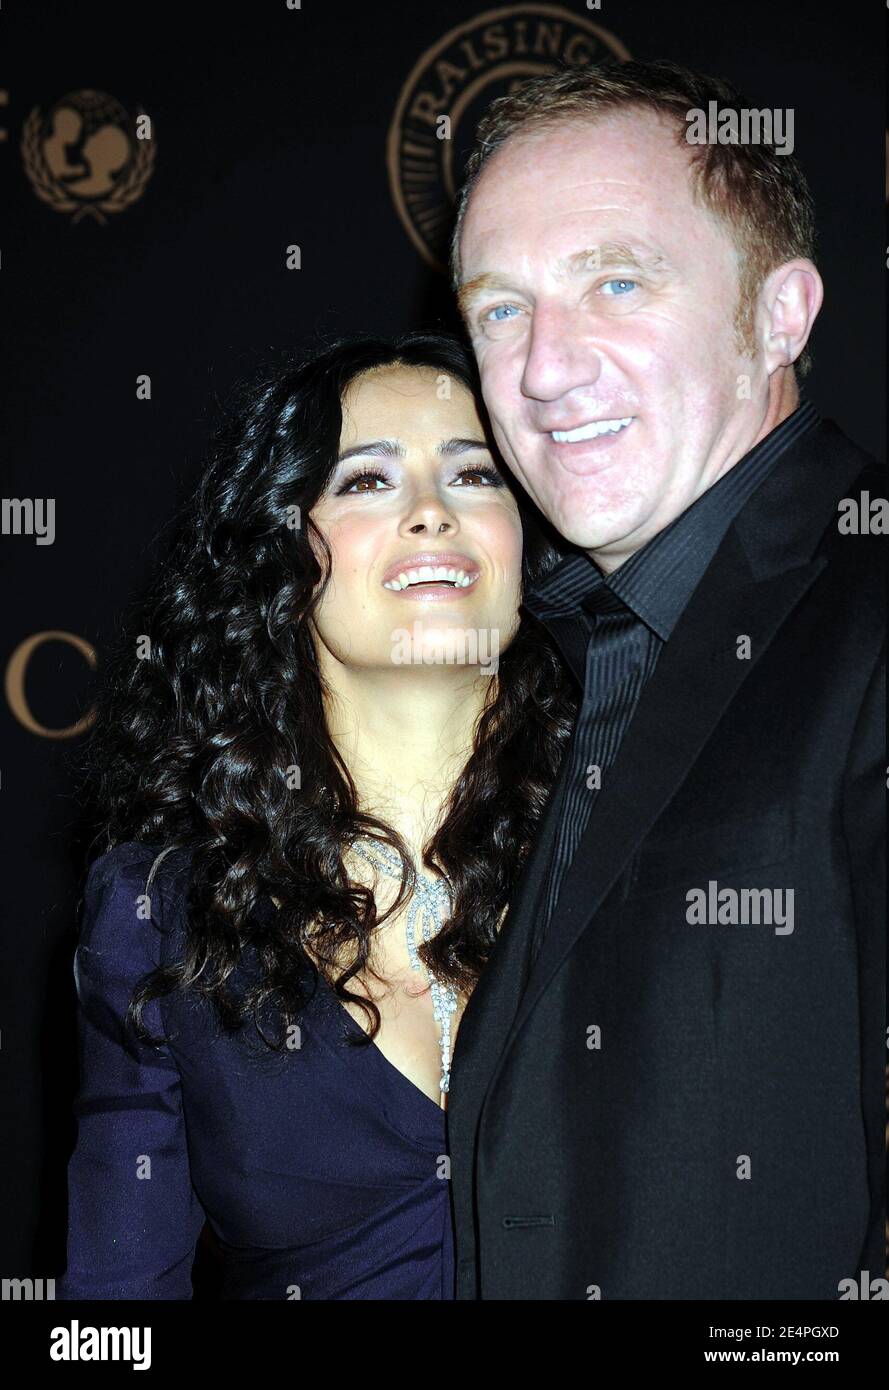 Salma Hayek wearing Gucci and husband Francois-Henri Pinault arriving for the Gucci and Madonna host A Night To Benefit Raising Malawi and Unicef, held at the United Nations Plaza in New York City, NY, USA, February 6, 2008. Photo by David Miller/ABACAPRESS.COM Stock Photo